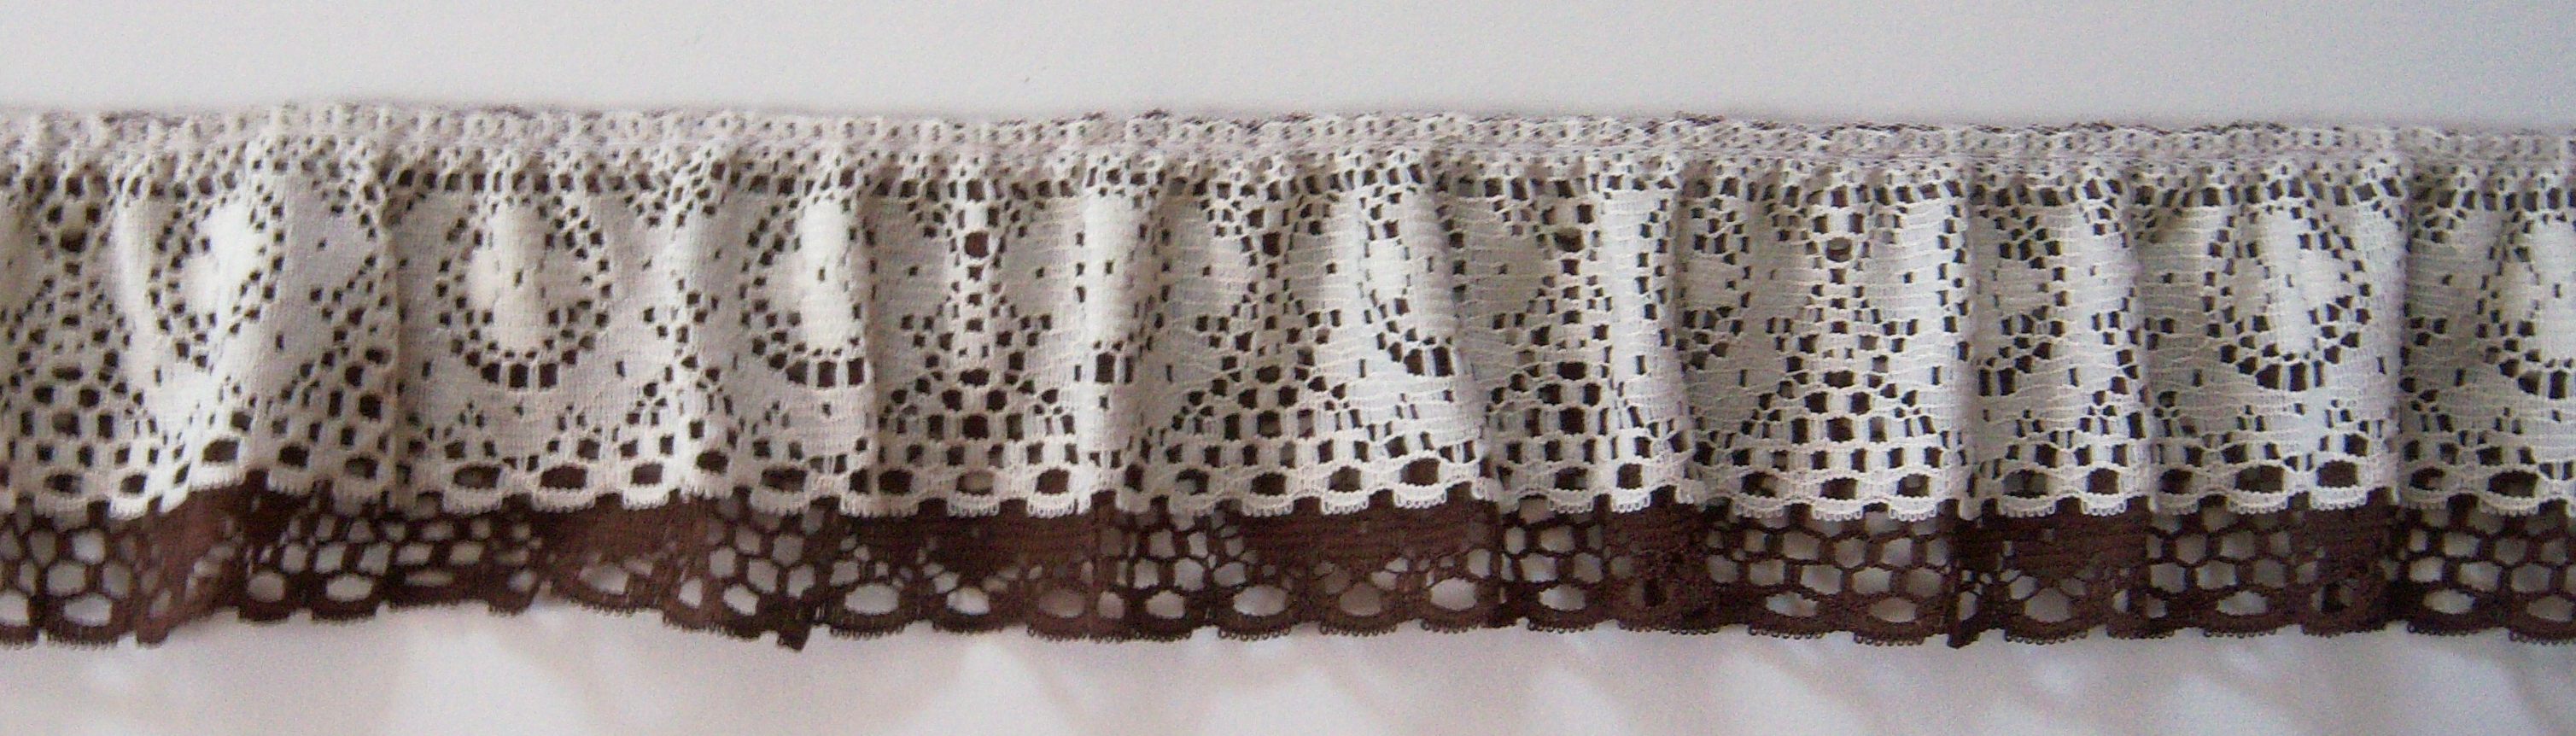 Ivory/Brown 2" Double Gathered Lace